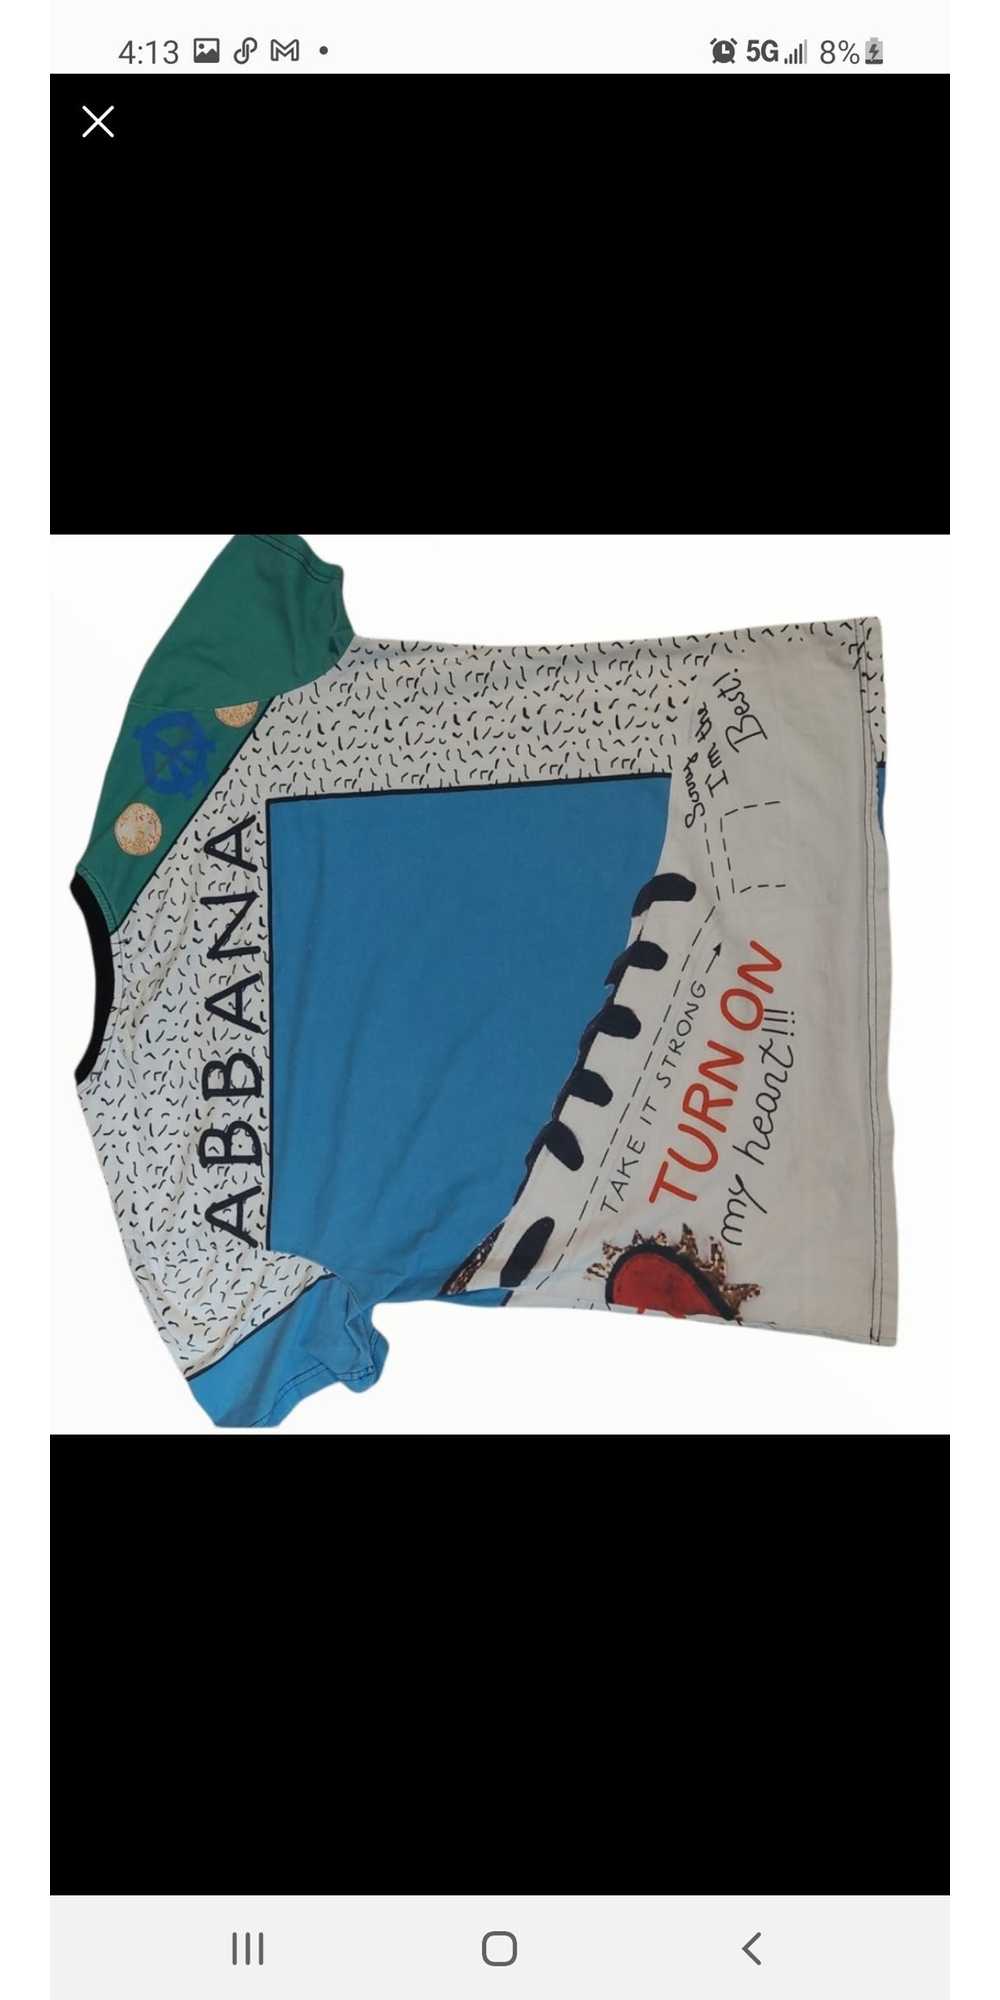 Dolce & Gabbana Just Pizza Tee Shirt in Light Blue - image 7